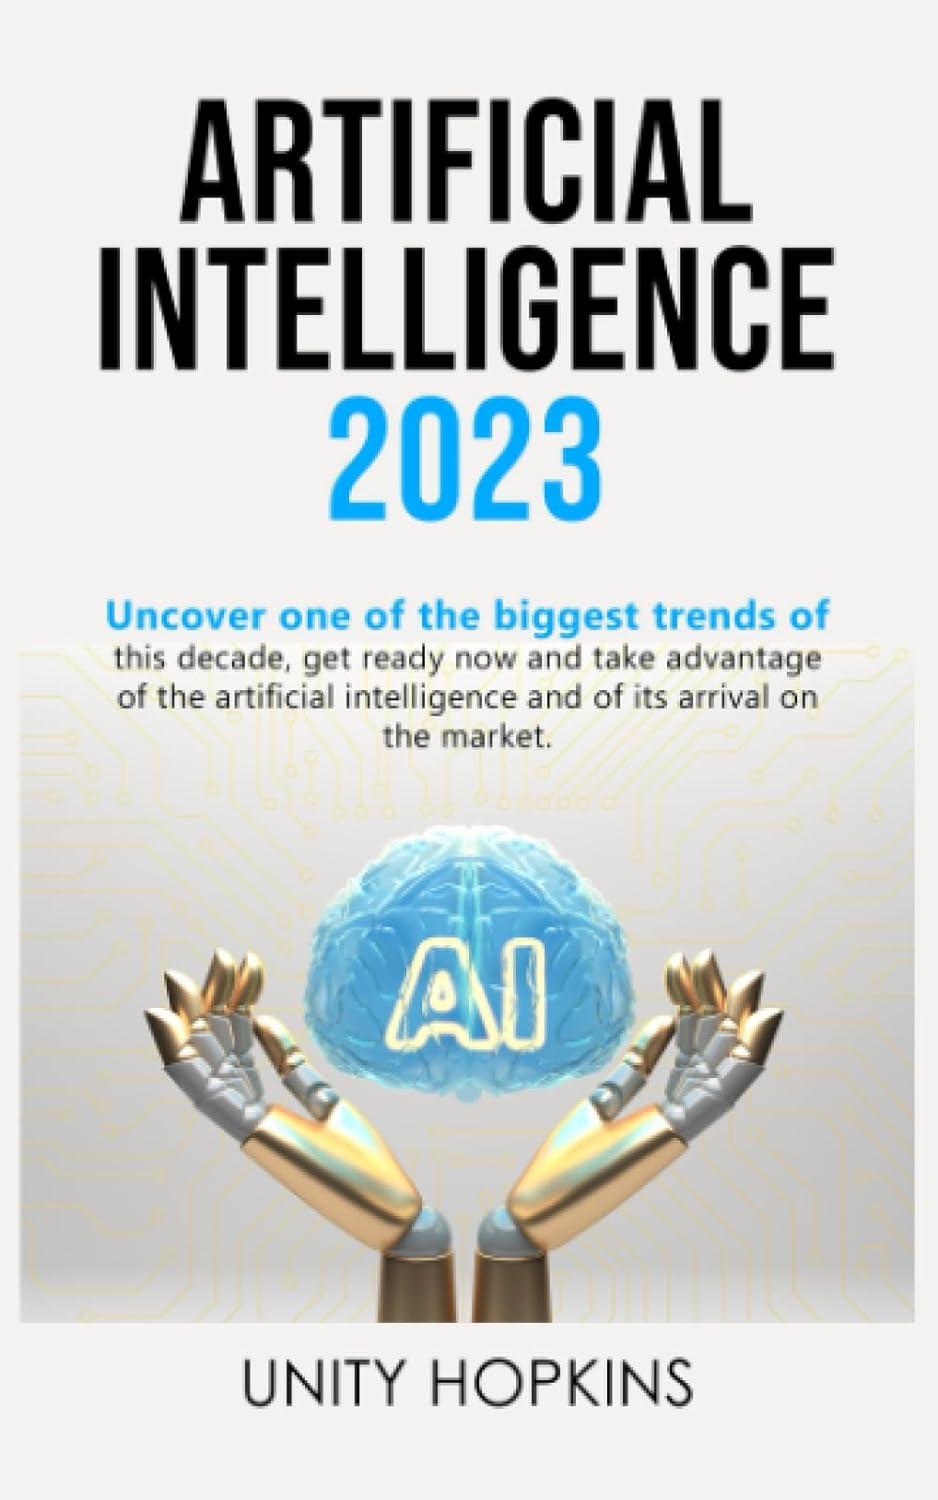 artificial intelligence 2023 uncover one of the biggest trends of this decade get ready now and take